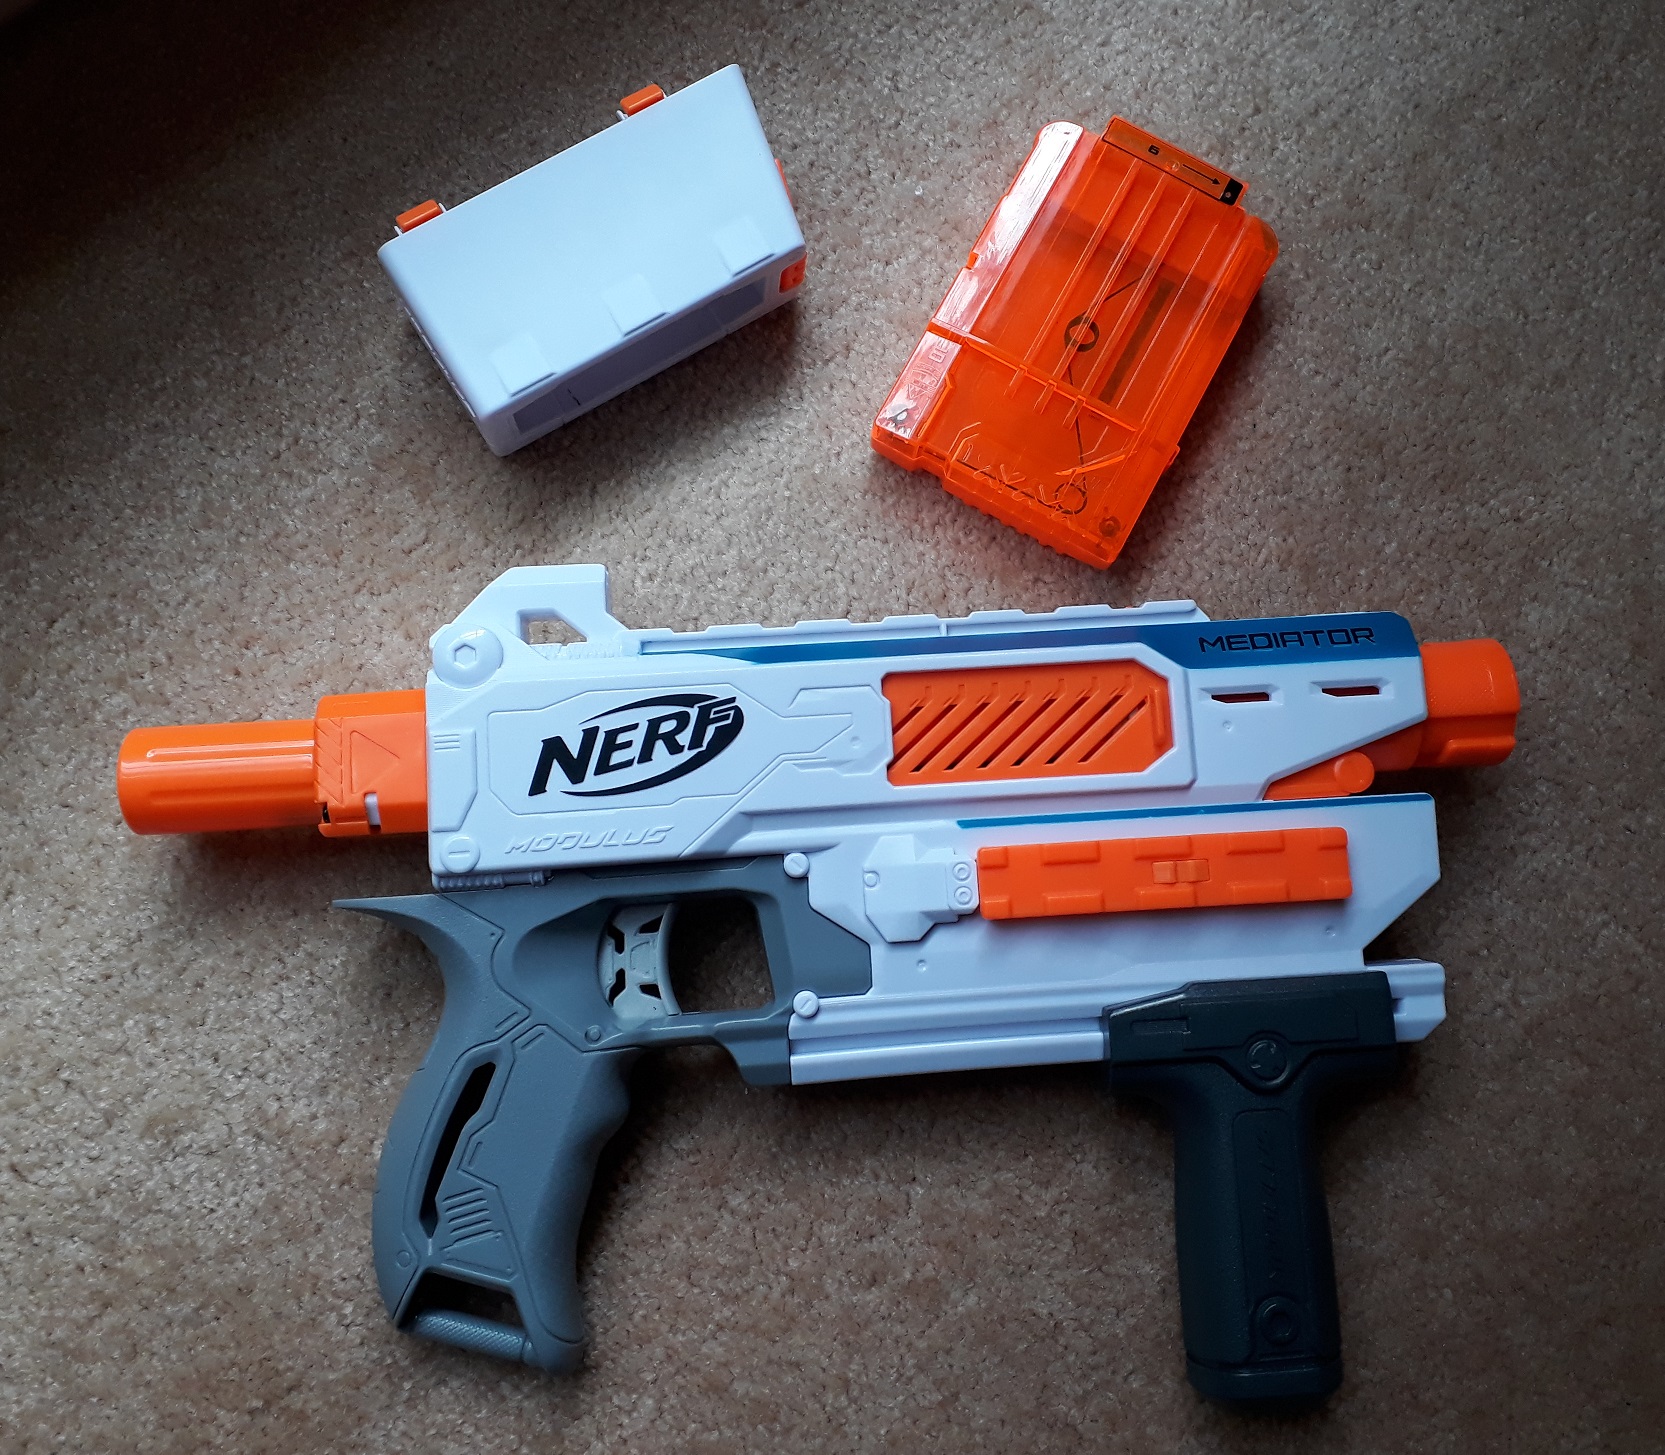 Nerf's Modulus Mediator includes 6 darts and is now available from